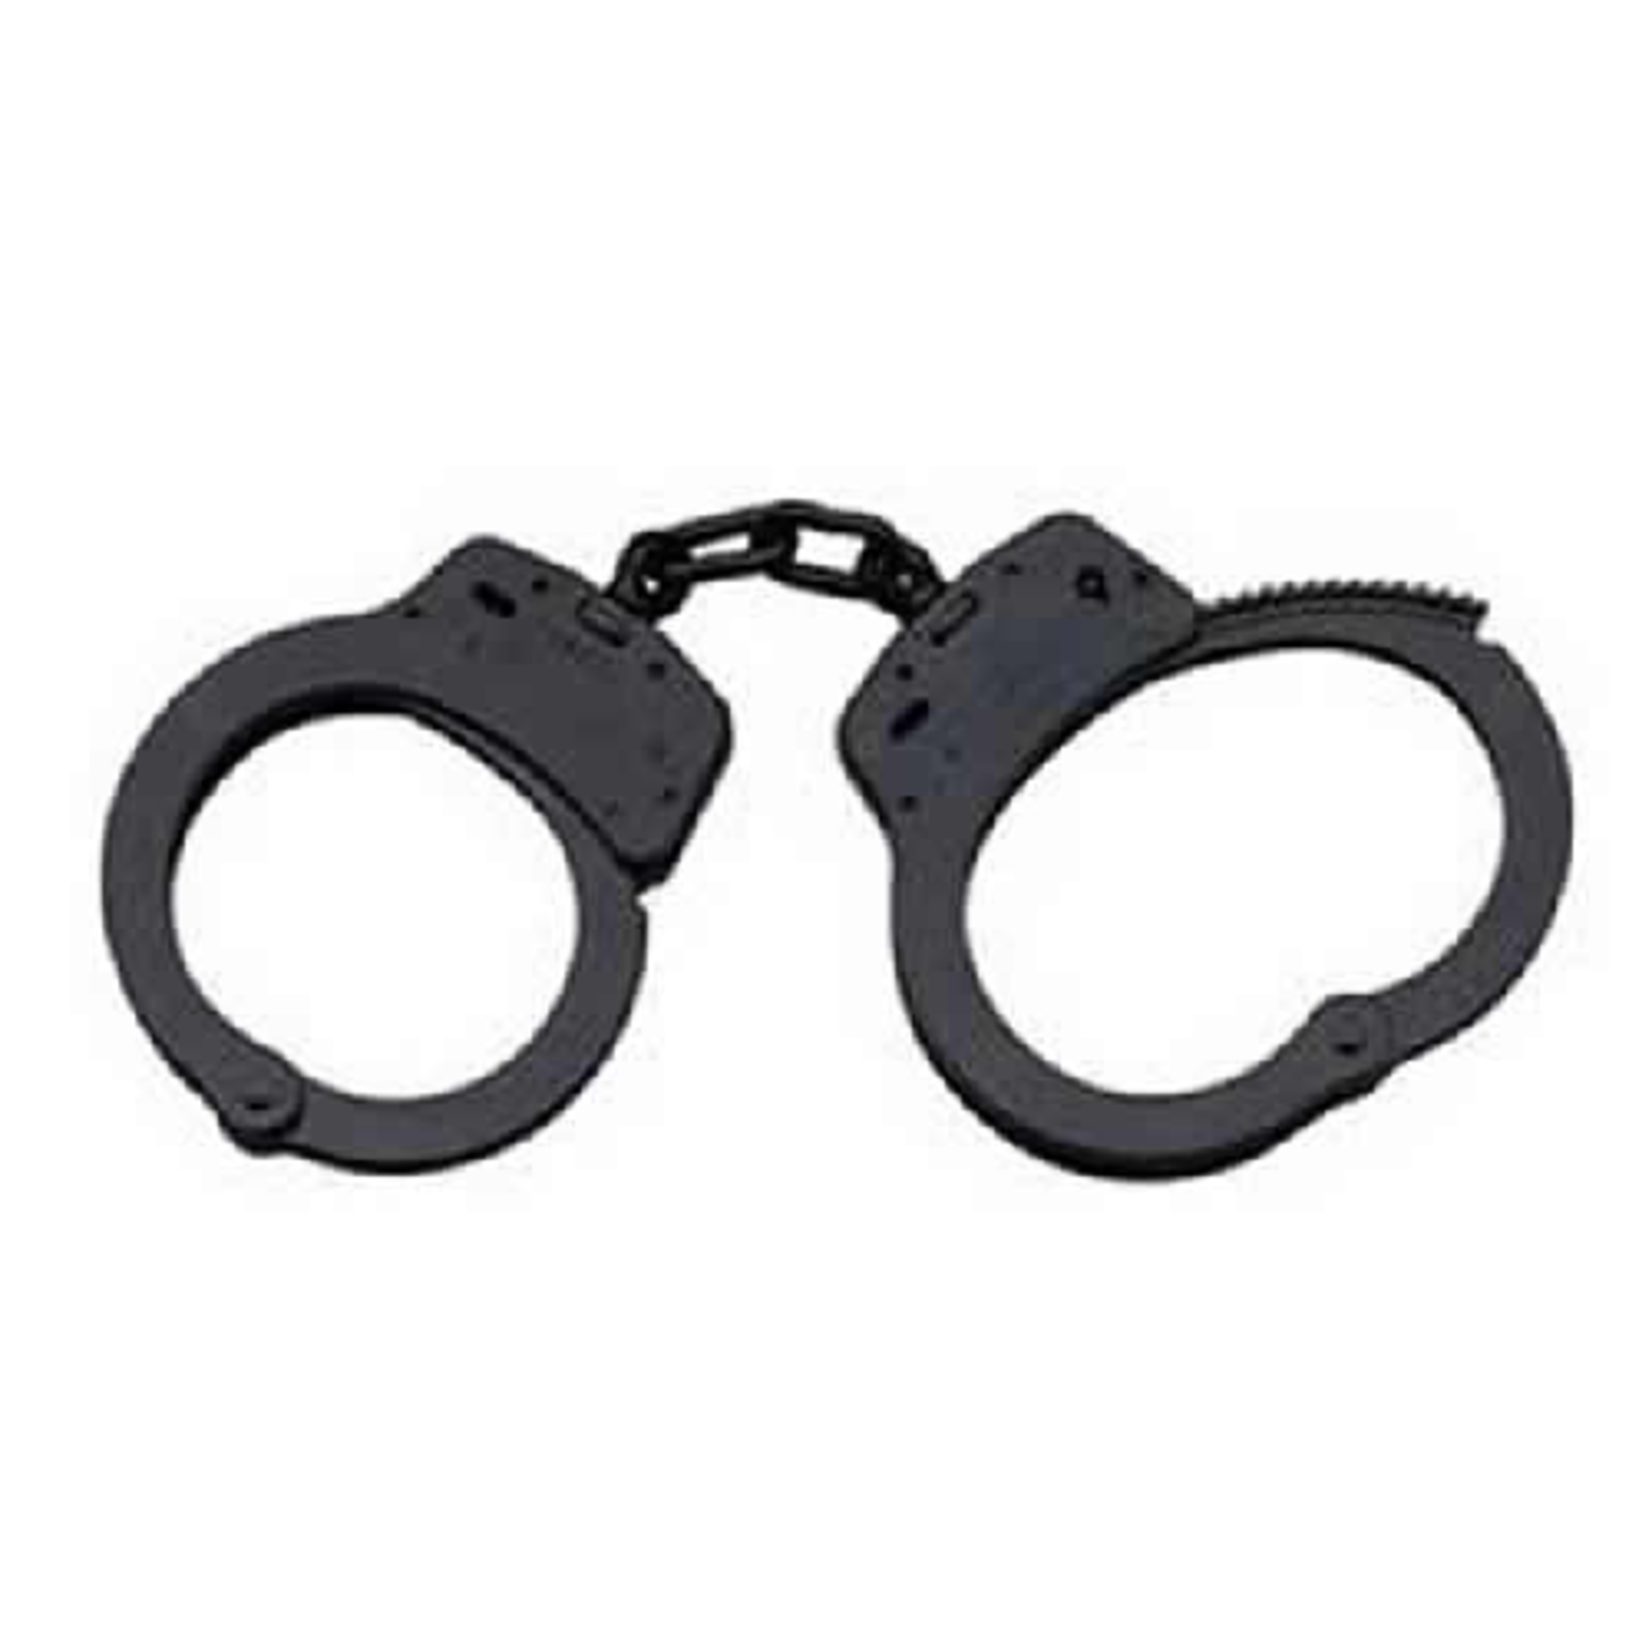 Smith & Wesson Smith & Wesson Handcuffs - 100 Blue